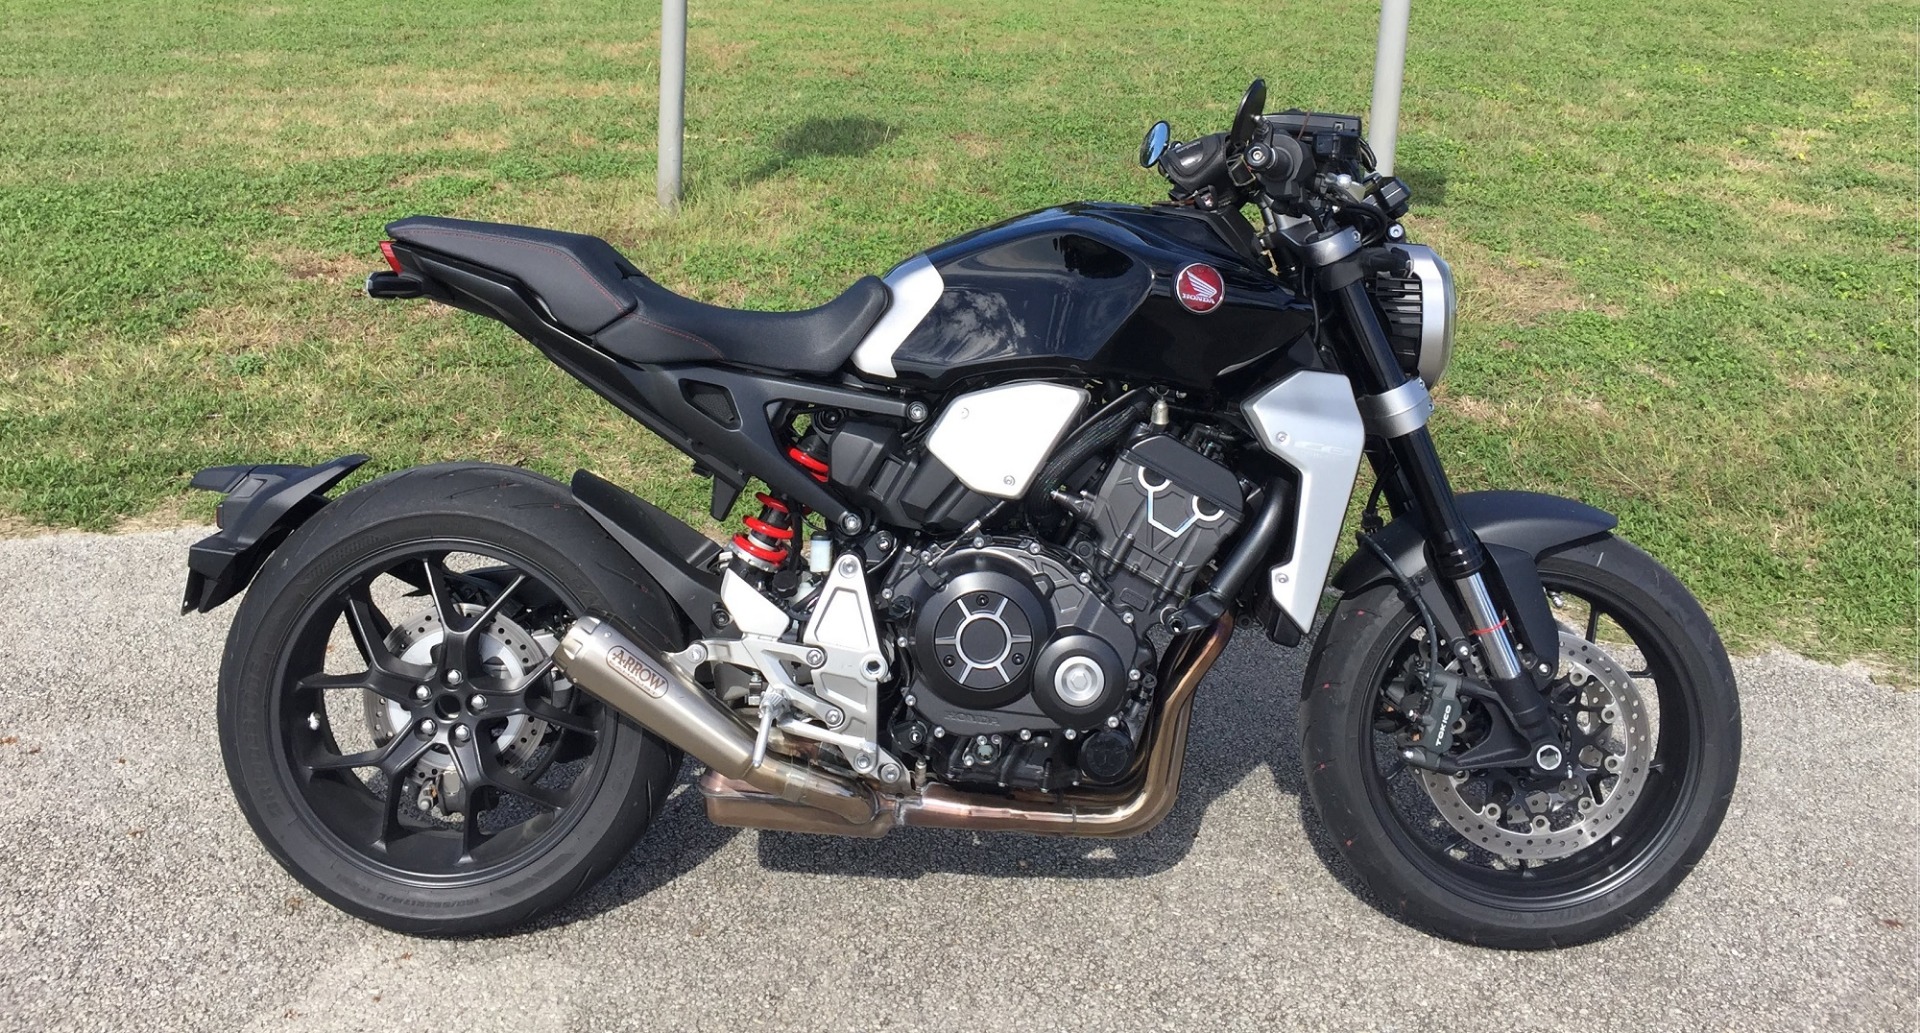 The Honda CB1000R - 13 New Customs From Spain, Portugal 